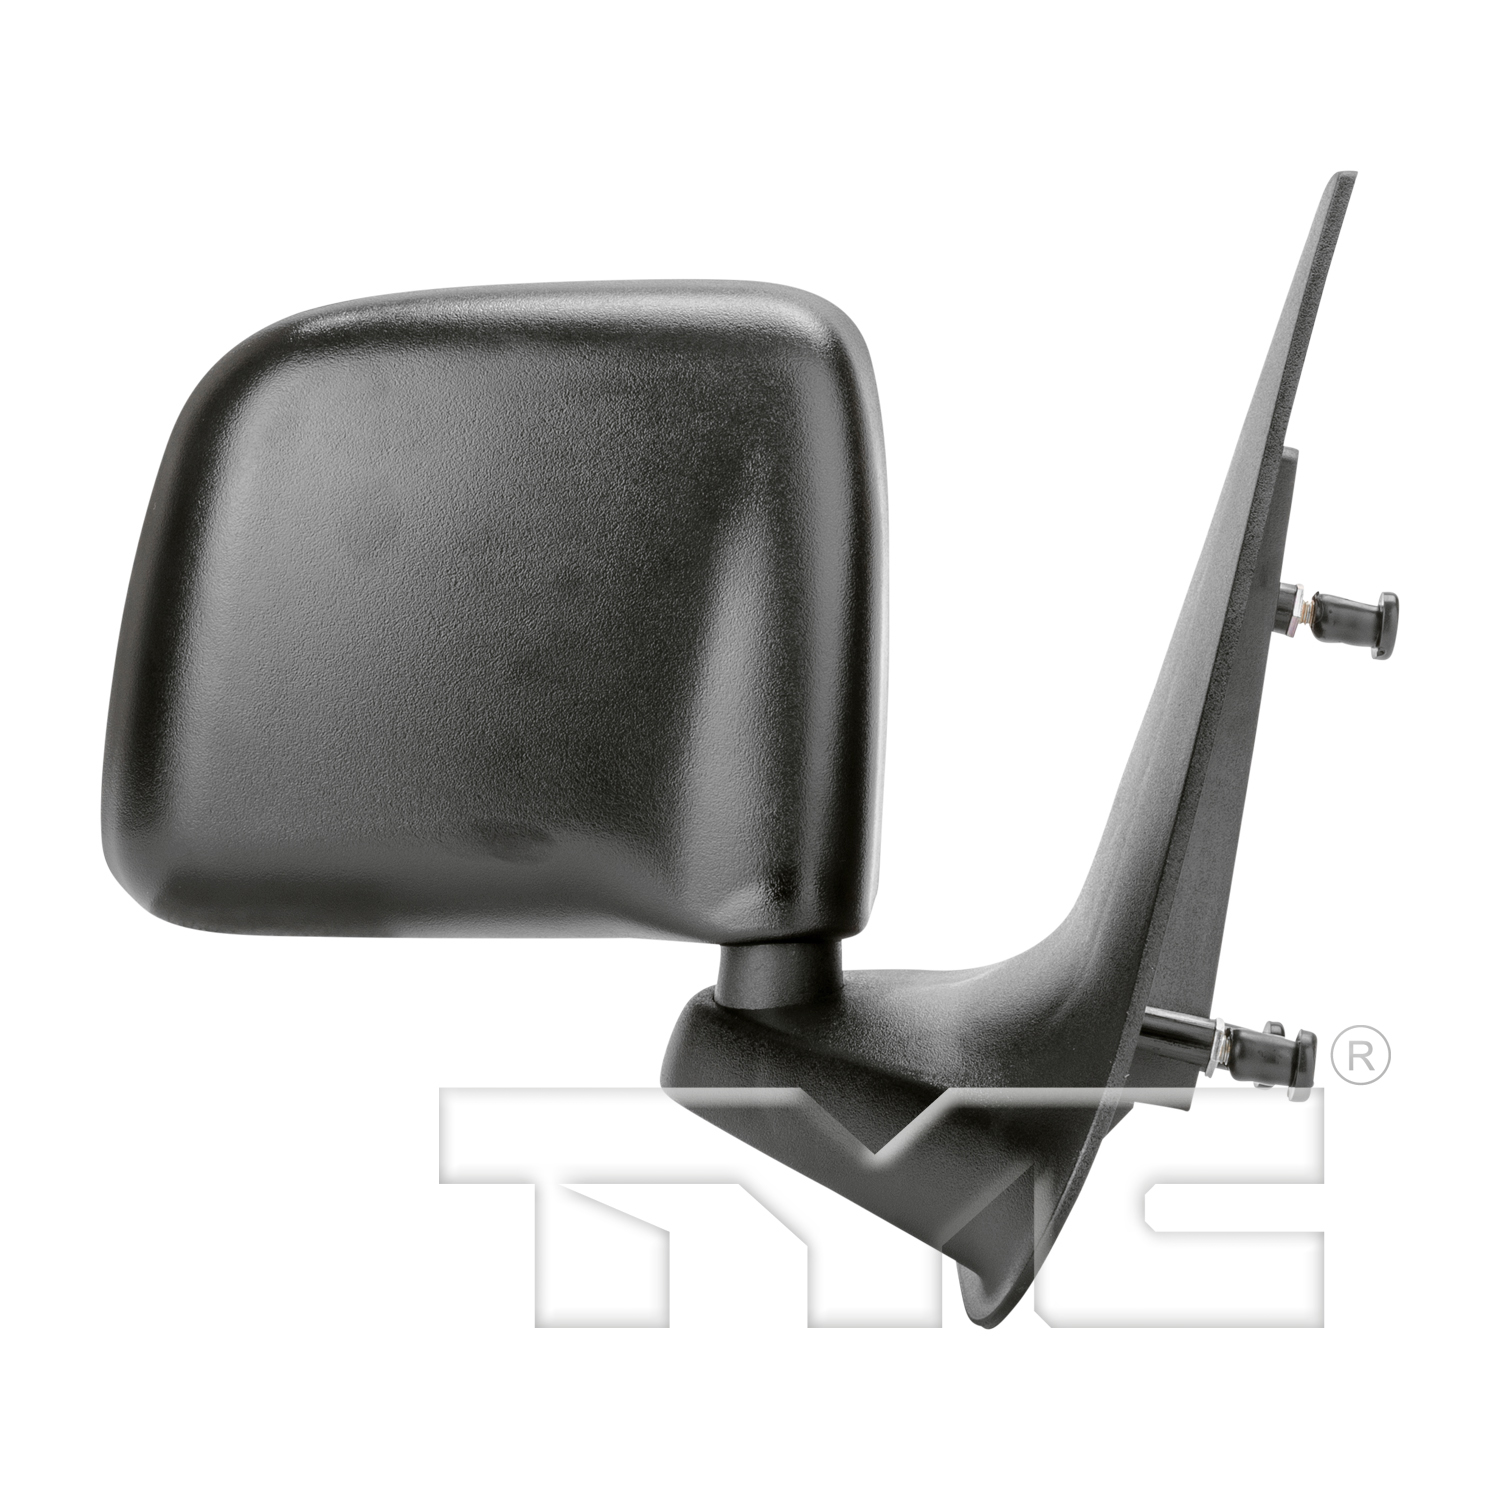 Aftermarket MIRRORS for MAZDA - B2500, B2500,98-98,RT Mirror outside rear view